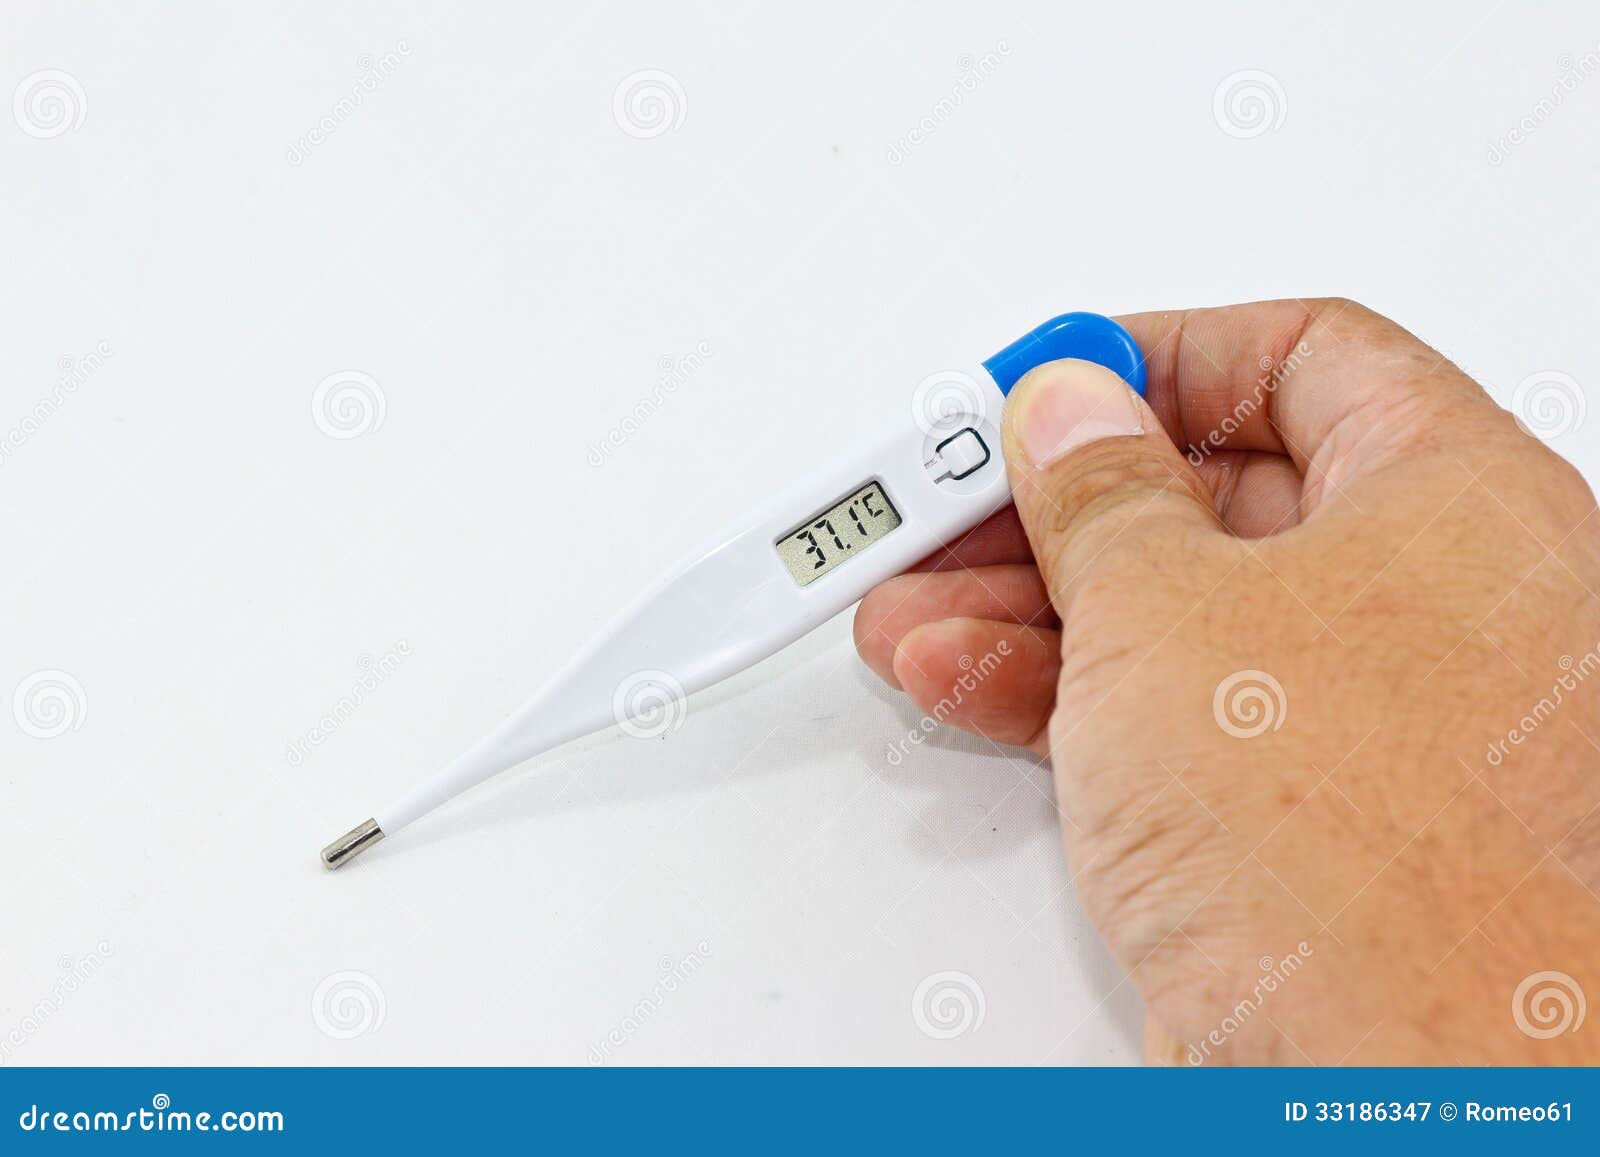 Thermometer Thermostat Instrument To Measure Air Temperature Stock Photo,  Picture and Royalty Free Image. Image 33117380.